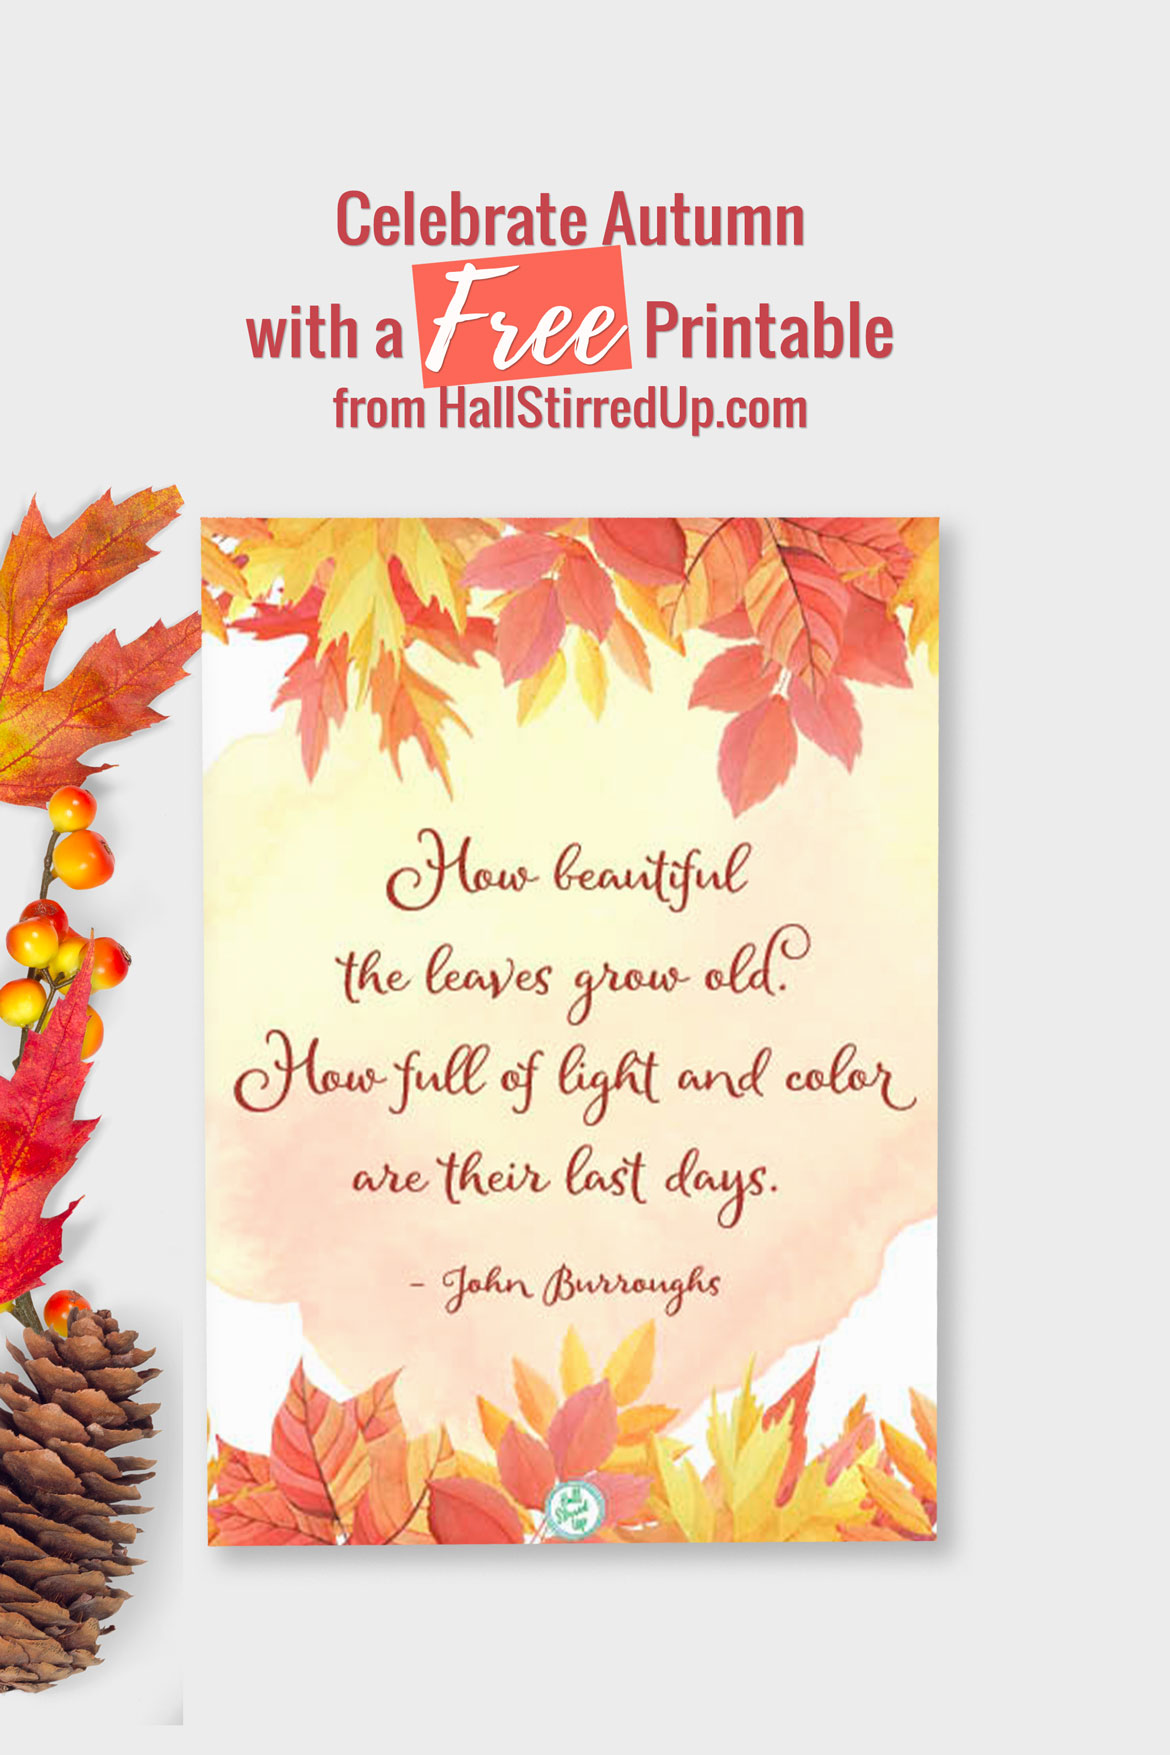 My favorite quotes for Autumn and a new printable